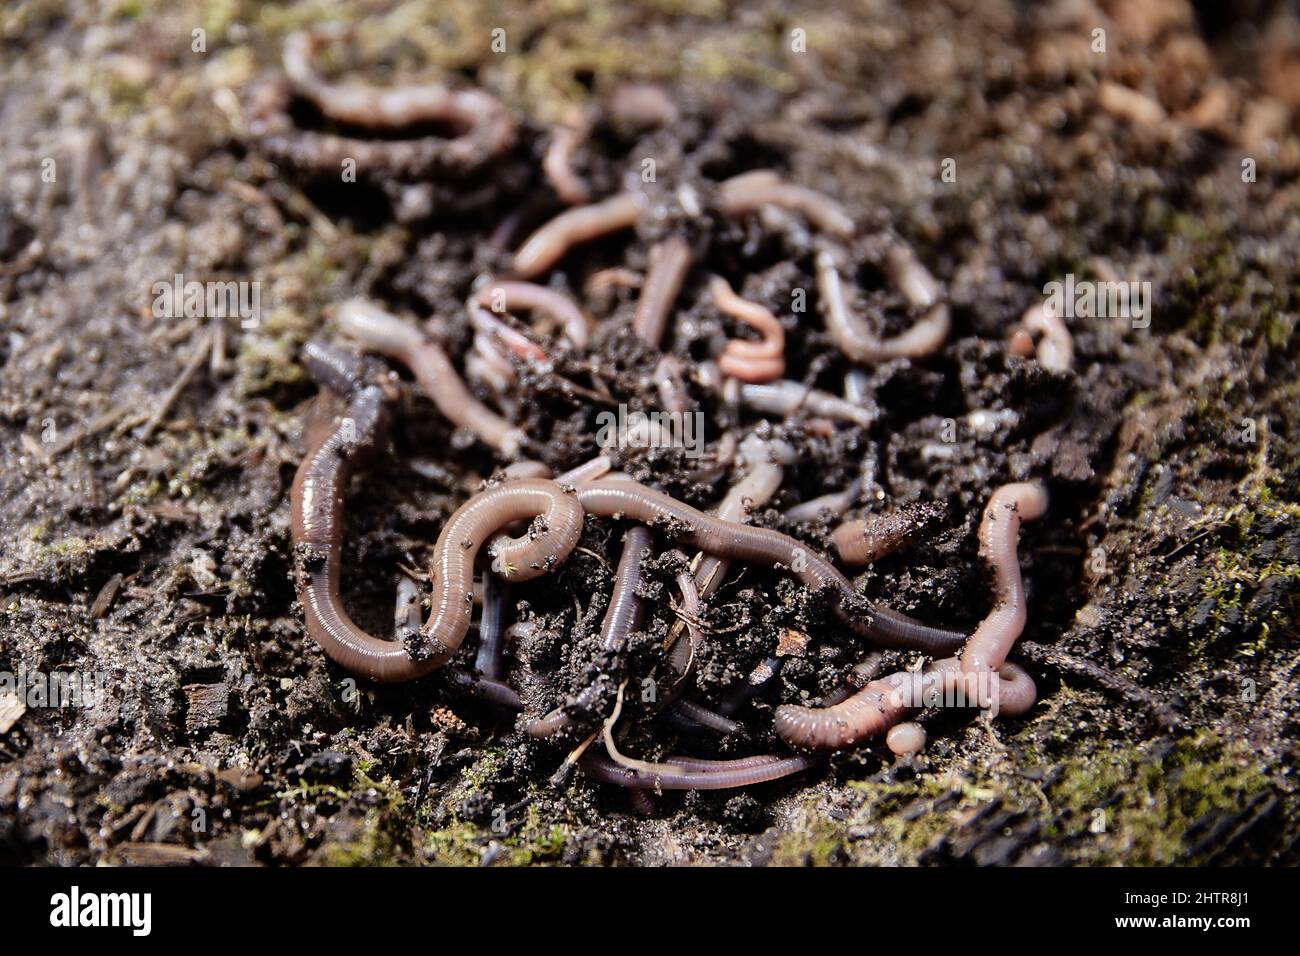 Earthworms on the soil. Production of vermicompost from household food waste. Stock Photo